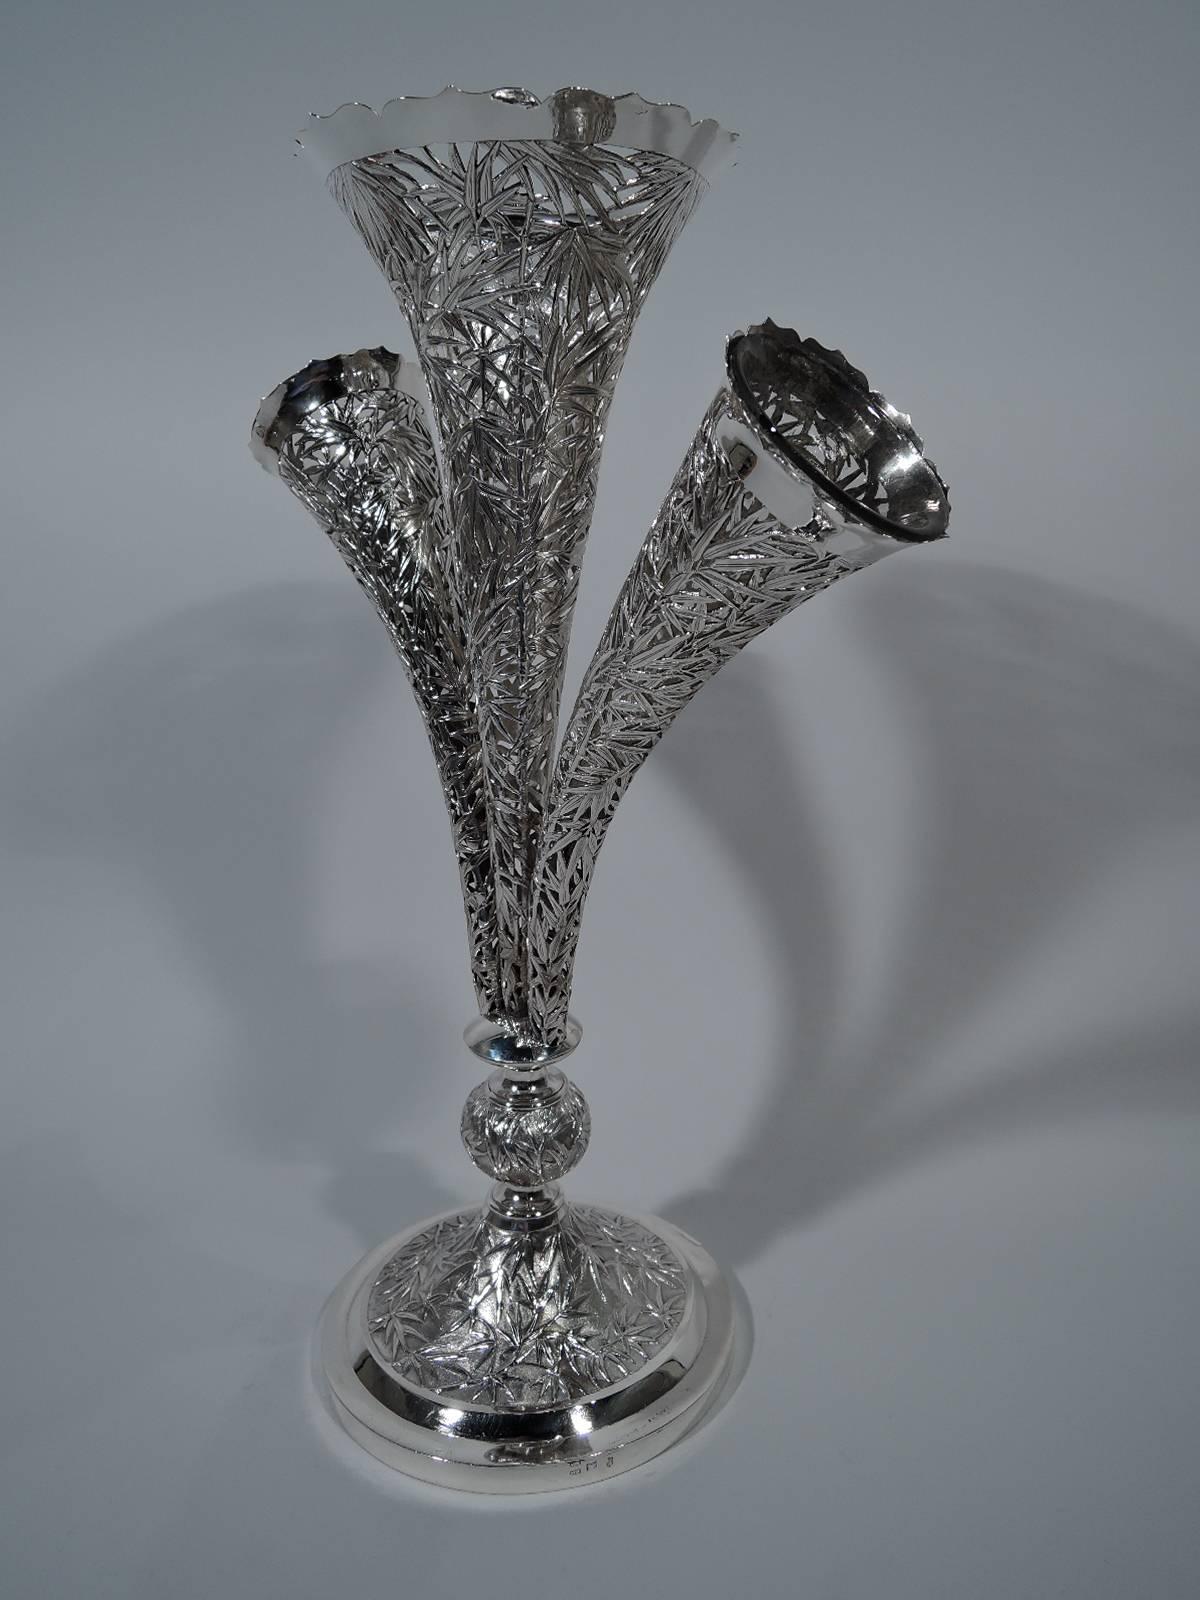 Rare and exciting Chinese export silver epergne, circa 1900. Three conical vases mounted to knop on raised foot. Raised bamboo motif on stippled ground. Vases pierced with clear glass liners. A standout centerpiece by Wang Hing, who was active in